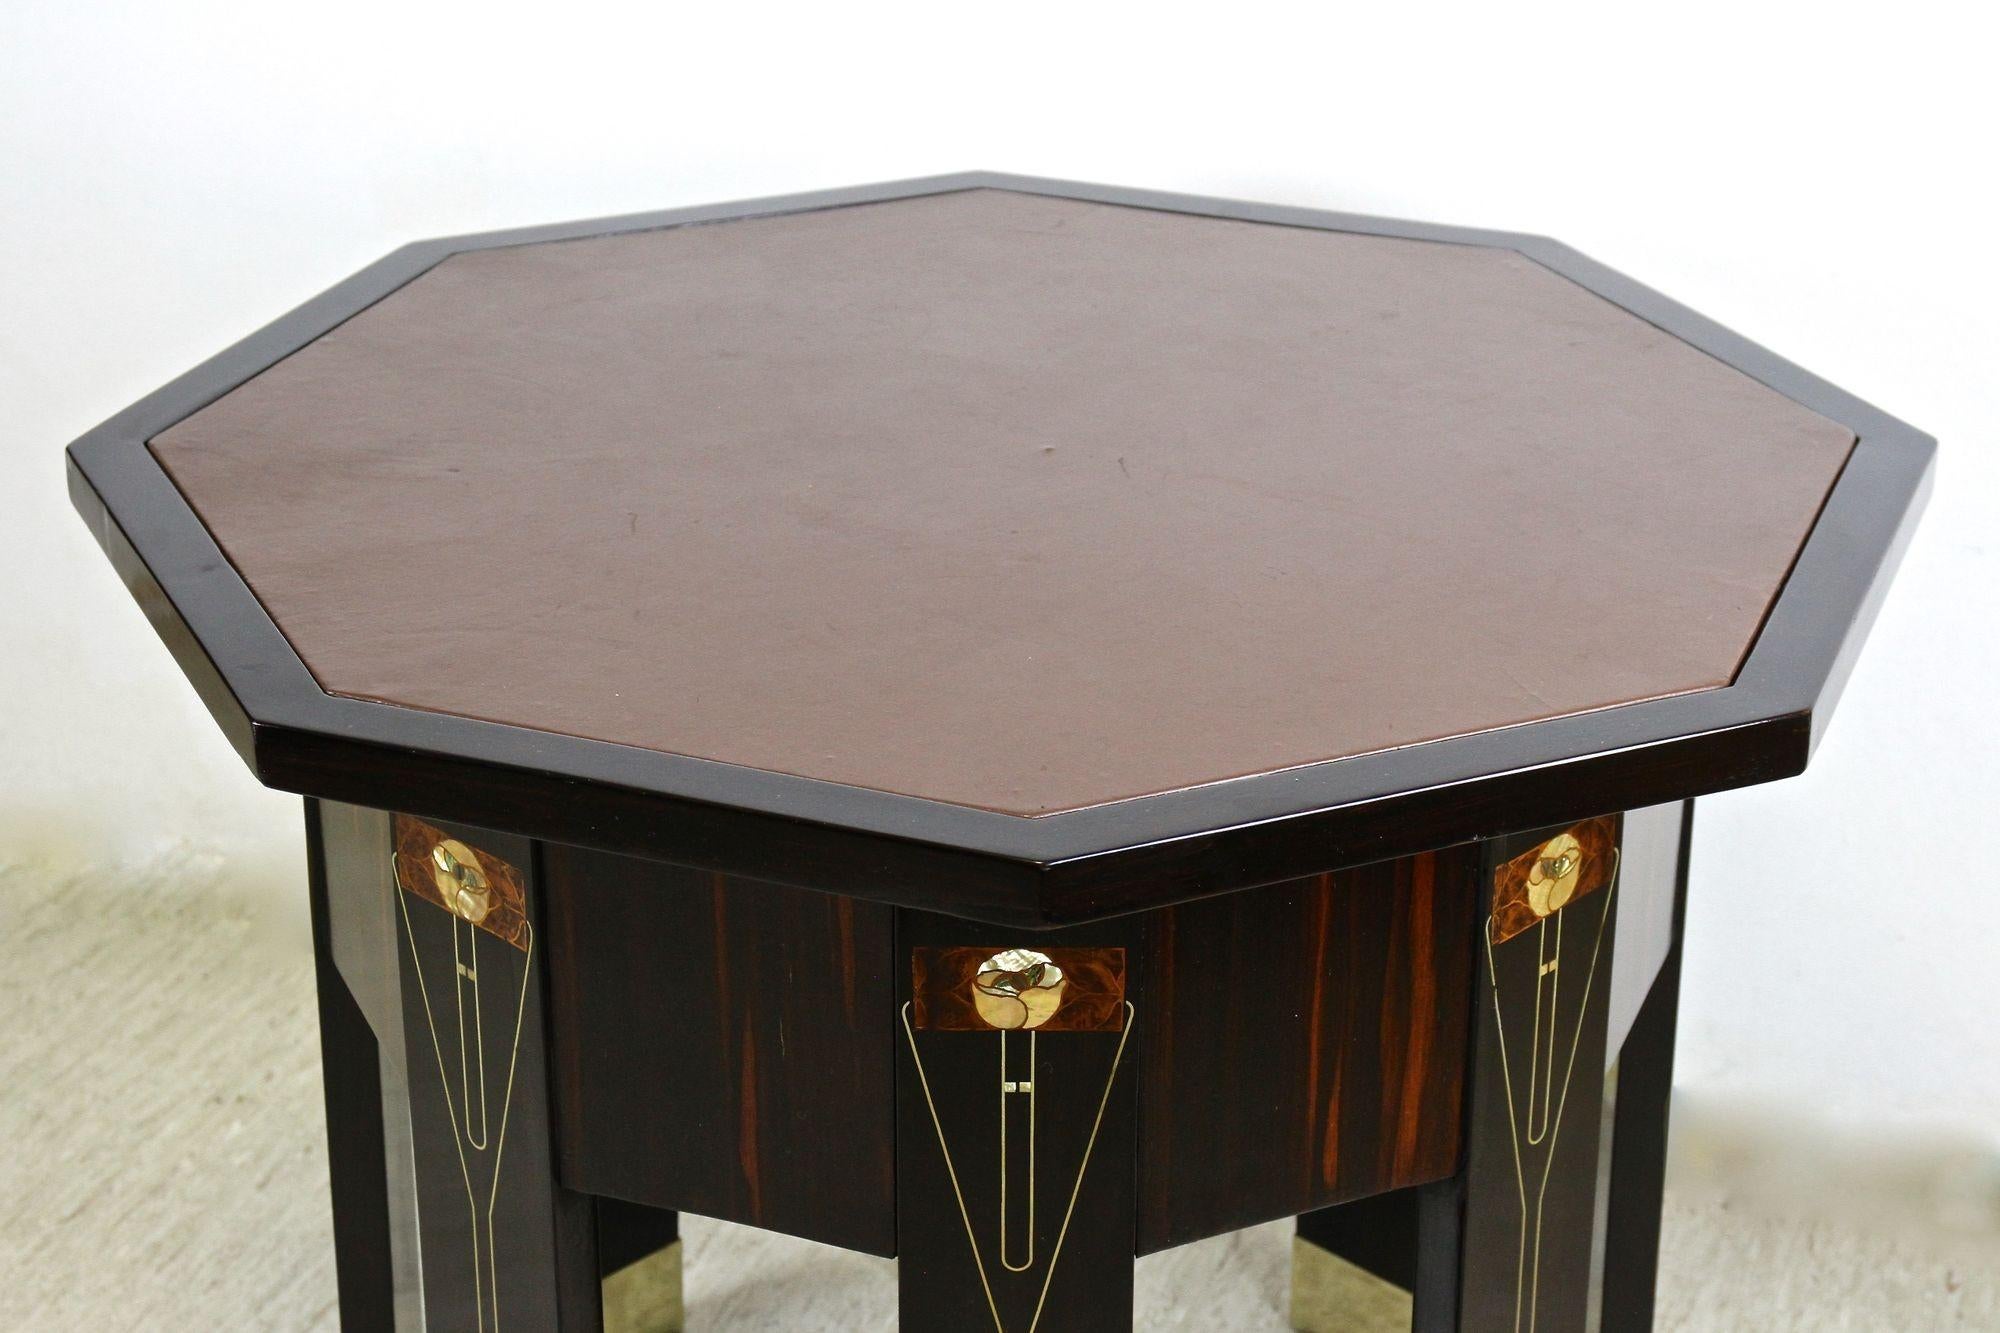 Art Nouveau Octagonal Palisander Table with Mother of Pearl Inlays, AT ca. 1905 For Sale 12